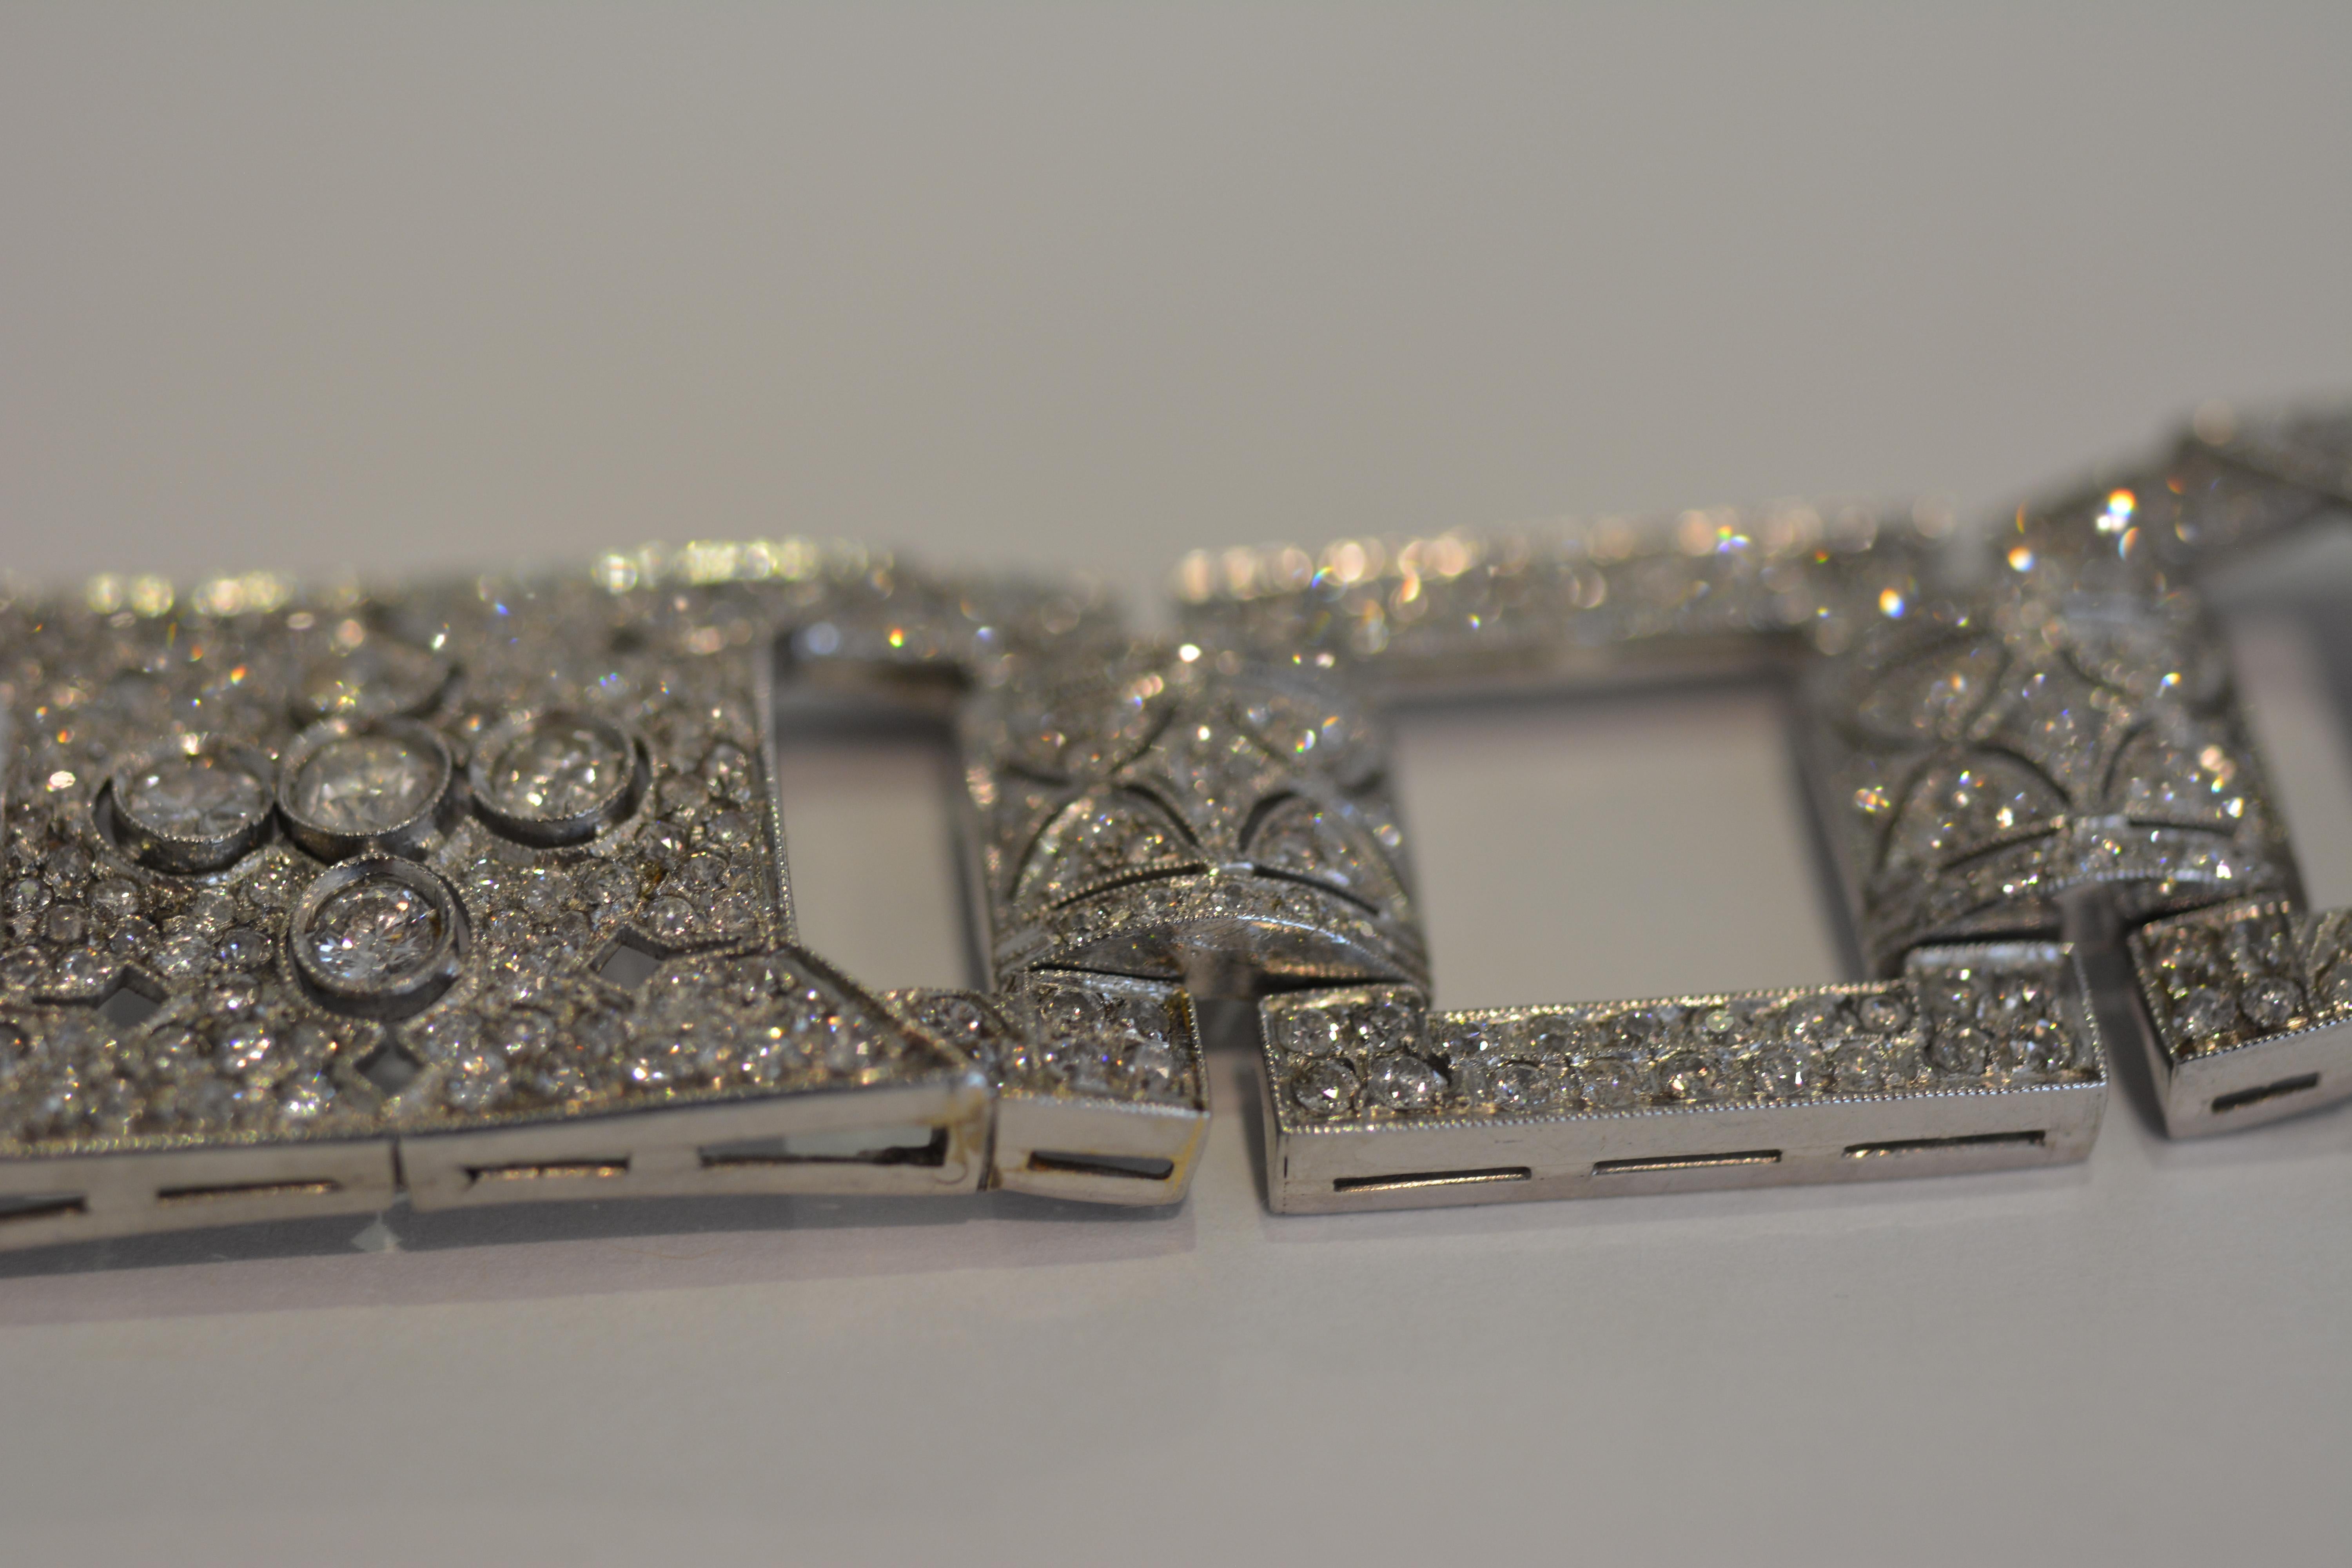 Platinum  and diamond Bracelet, Art Deco style
The bracelet features transition cut round diamonds and old-european cut small diamonds, weighing a total of 8.30 carats, set in platinum. Gross weight 51.00 grams.
Dimensions: 7.5 inches x 13/16